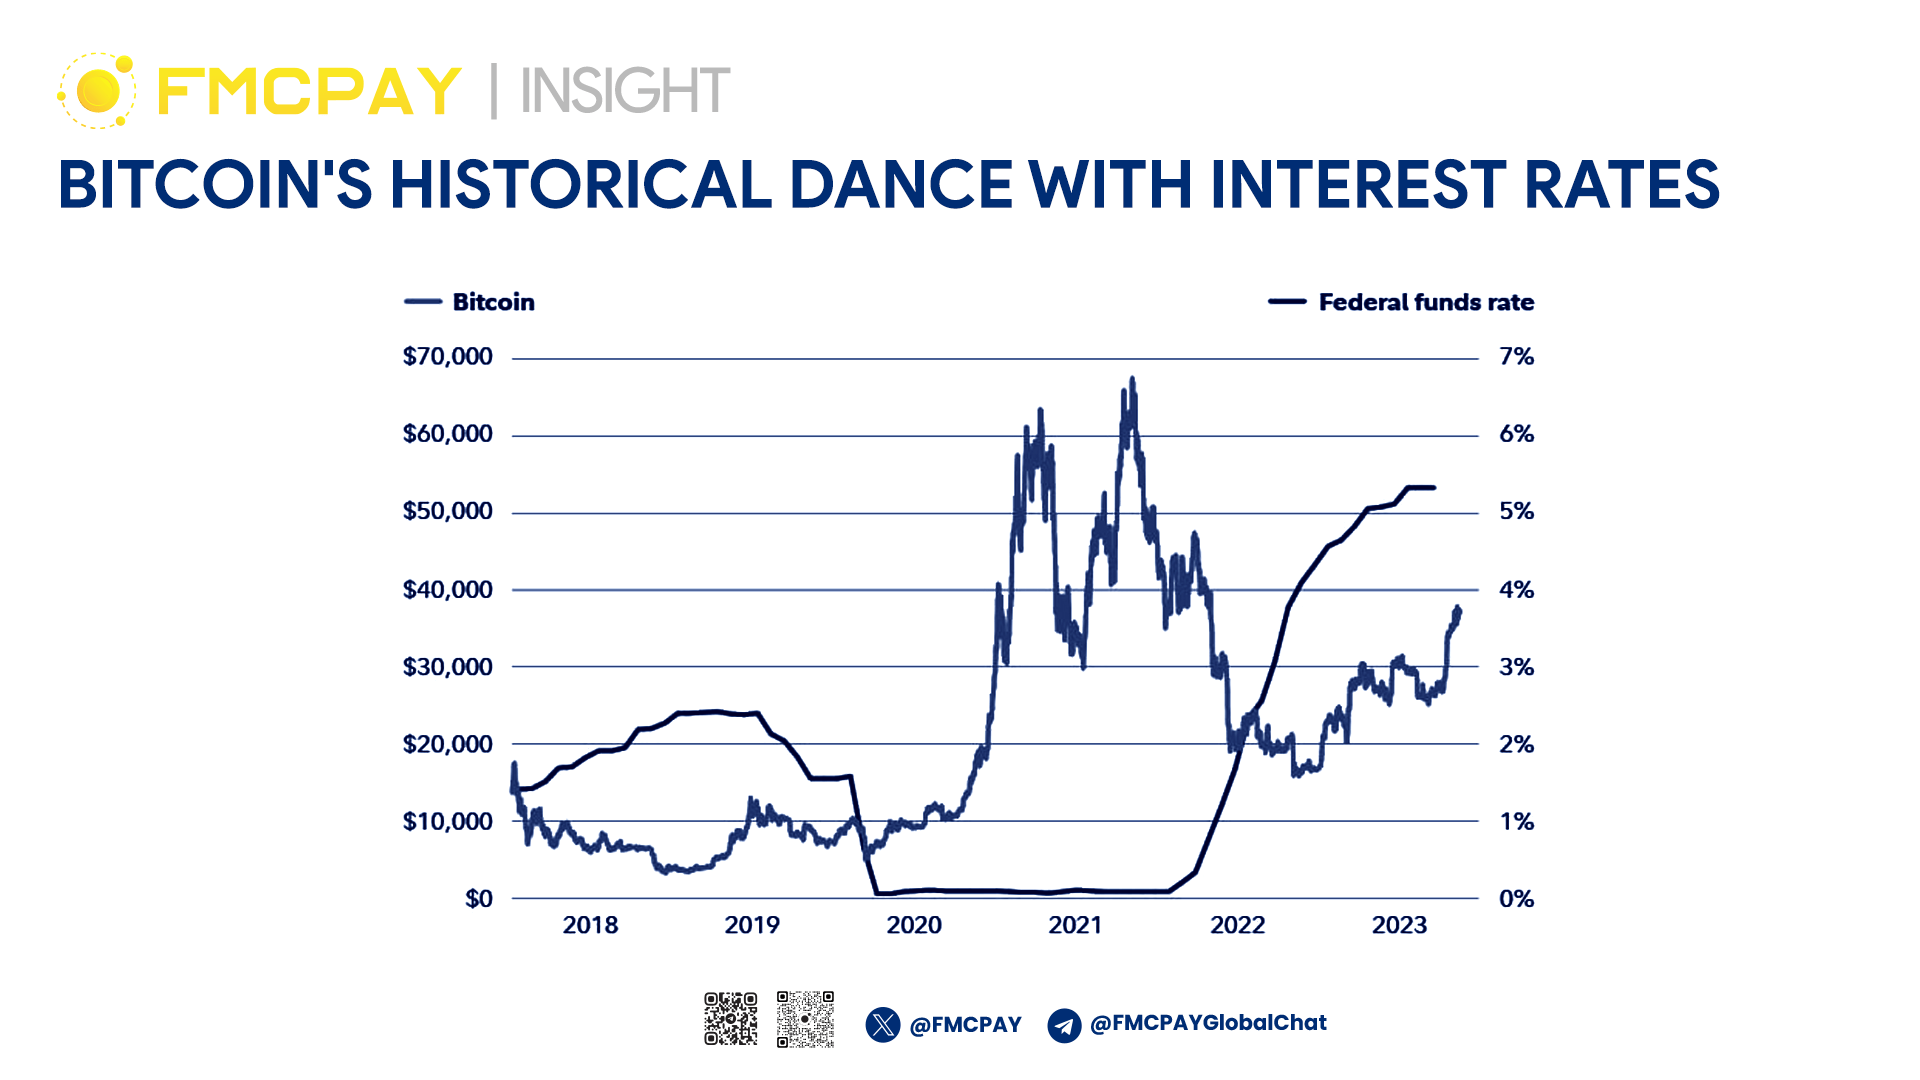 Bitcoin's historical dance with interest rates